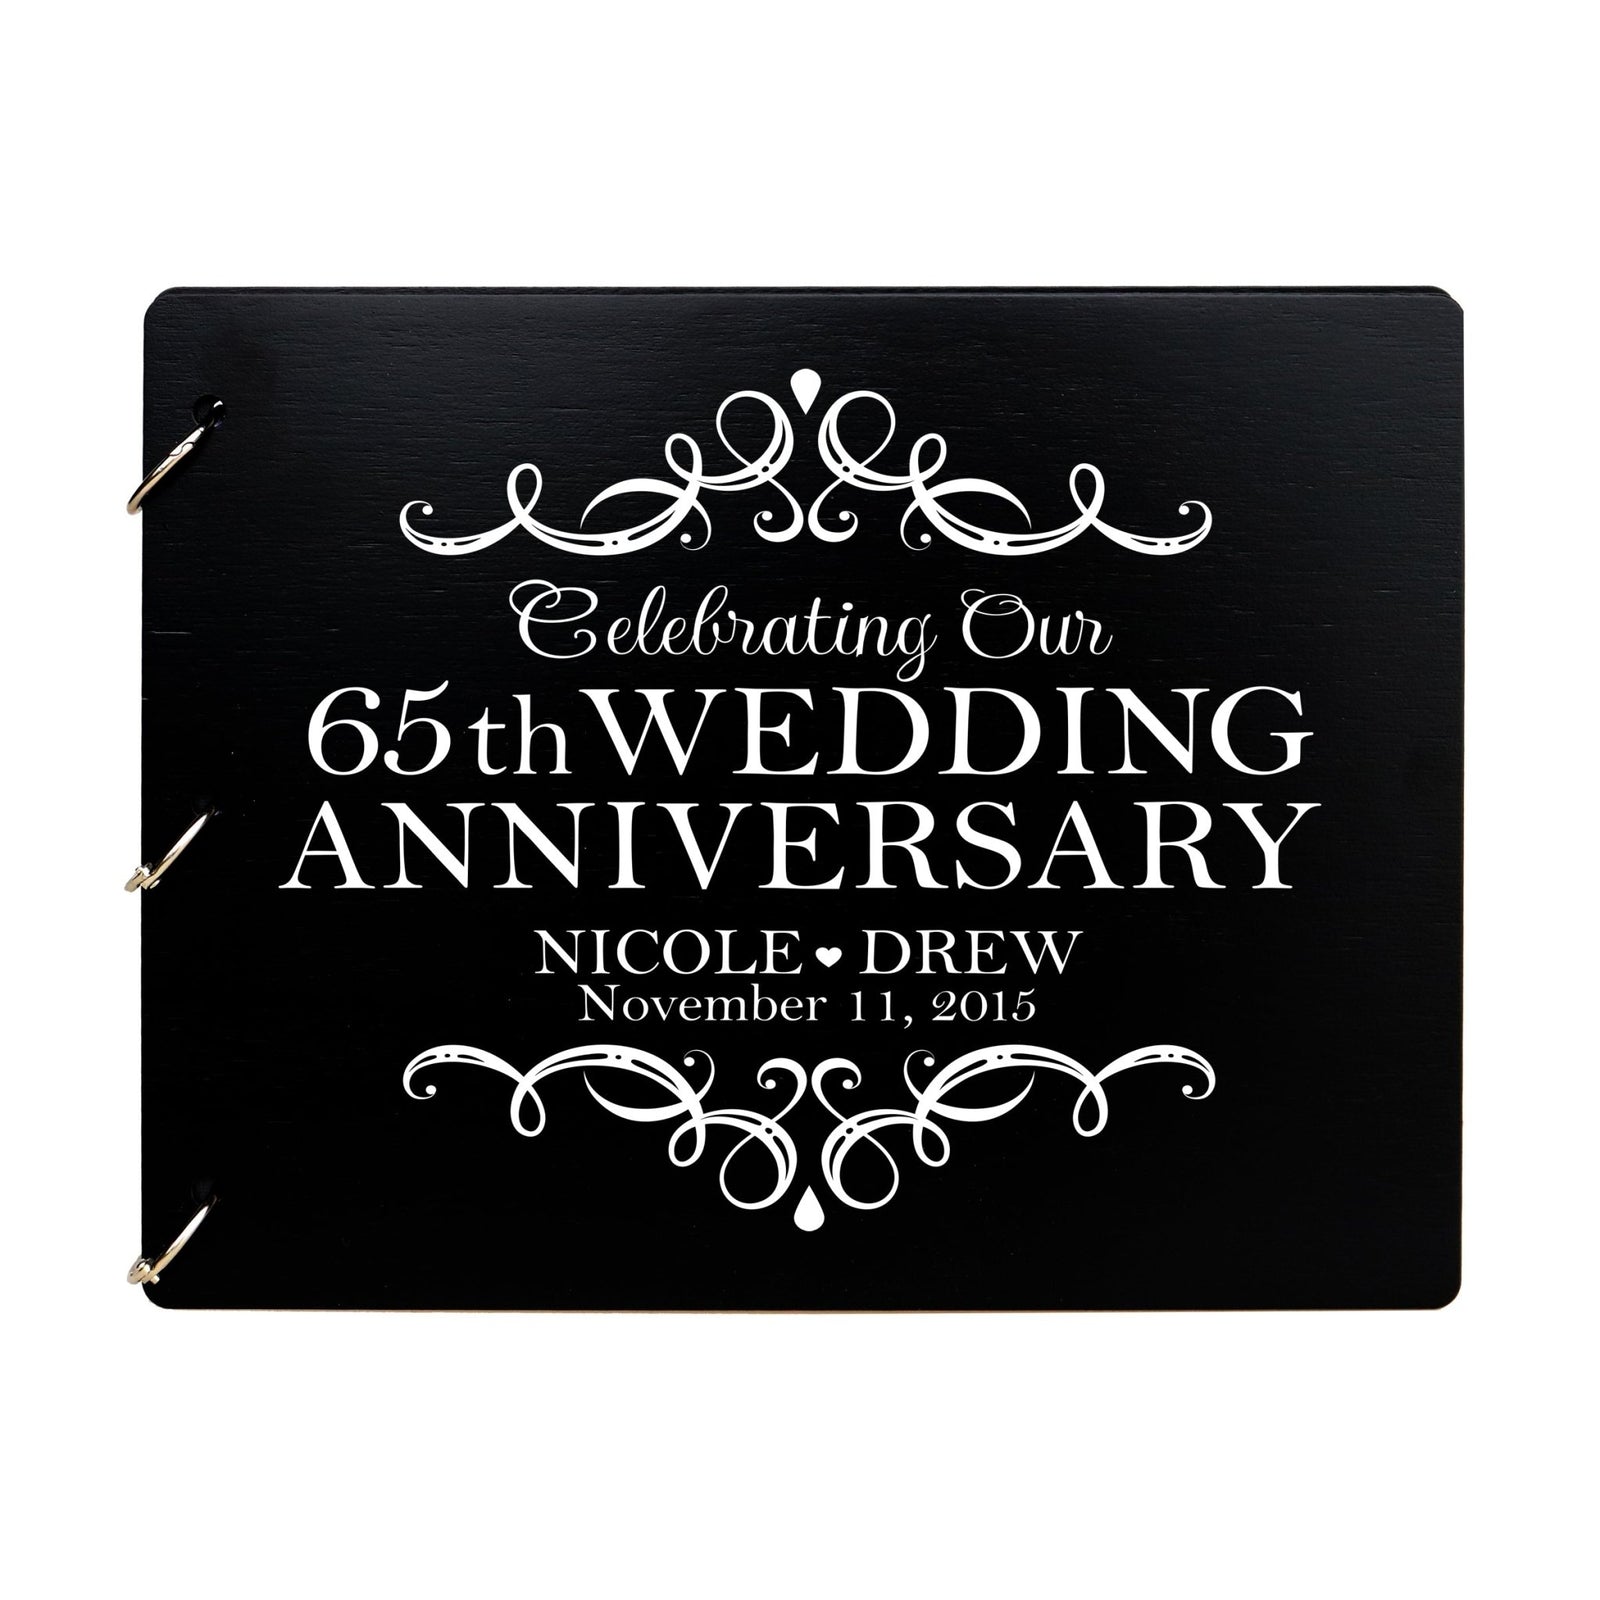 Personalized Guest Book Sign for 65th Wedding Anniversary - Celebrating - LifeSong Milestones